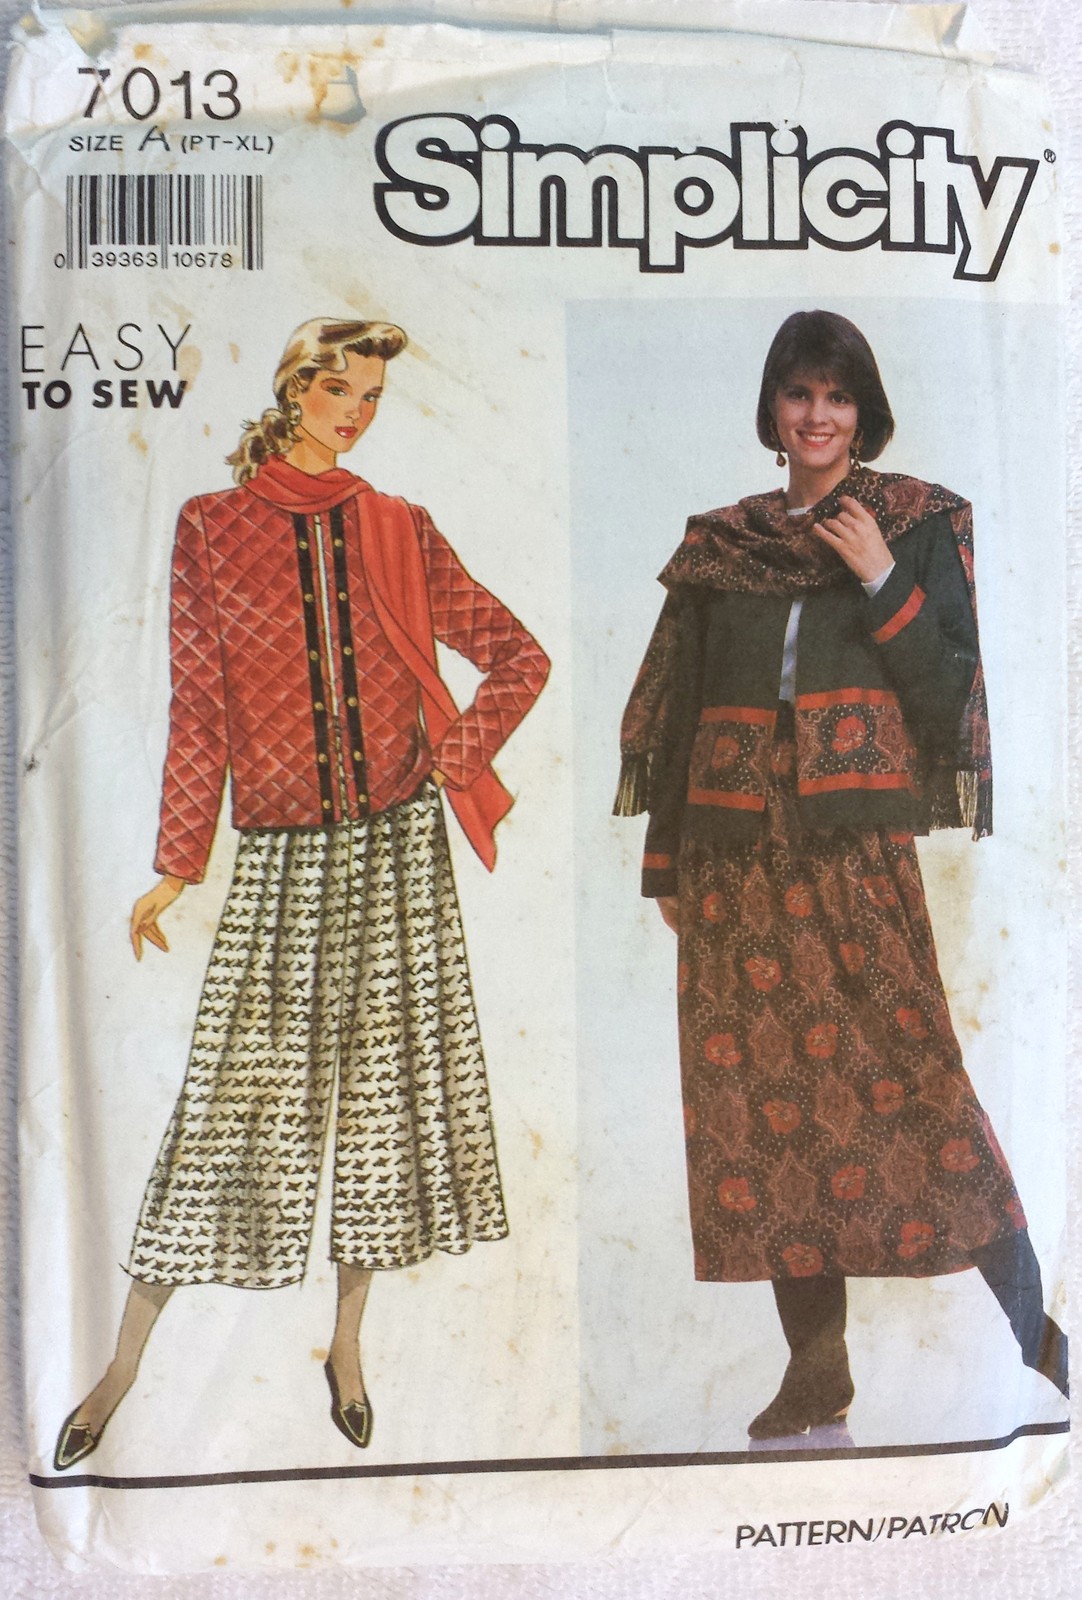 Simplicity 7013, Misses Jacket, Skirt & Scarf, Size 6,8,10,12,14,16,18 ...